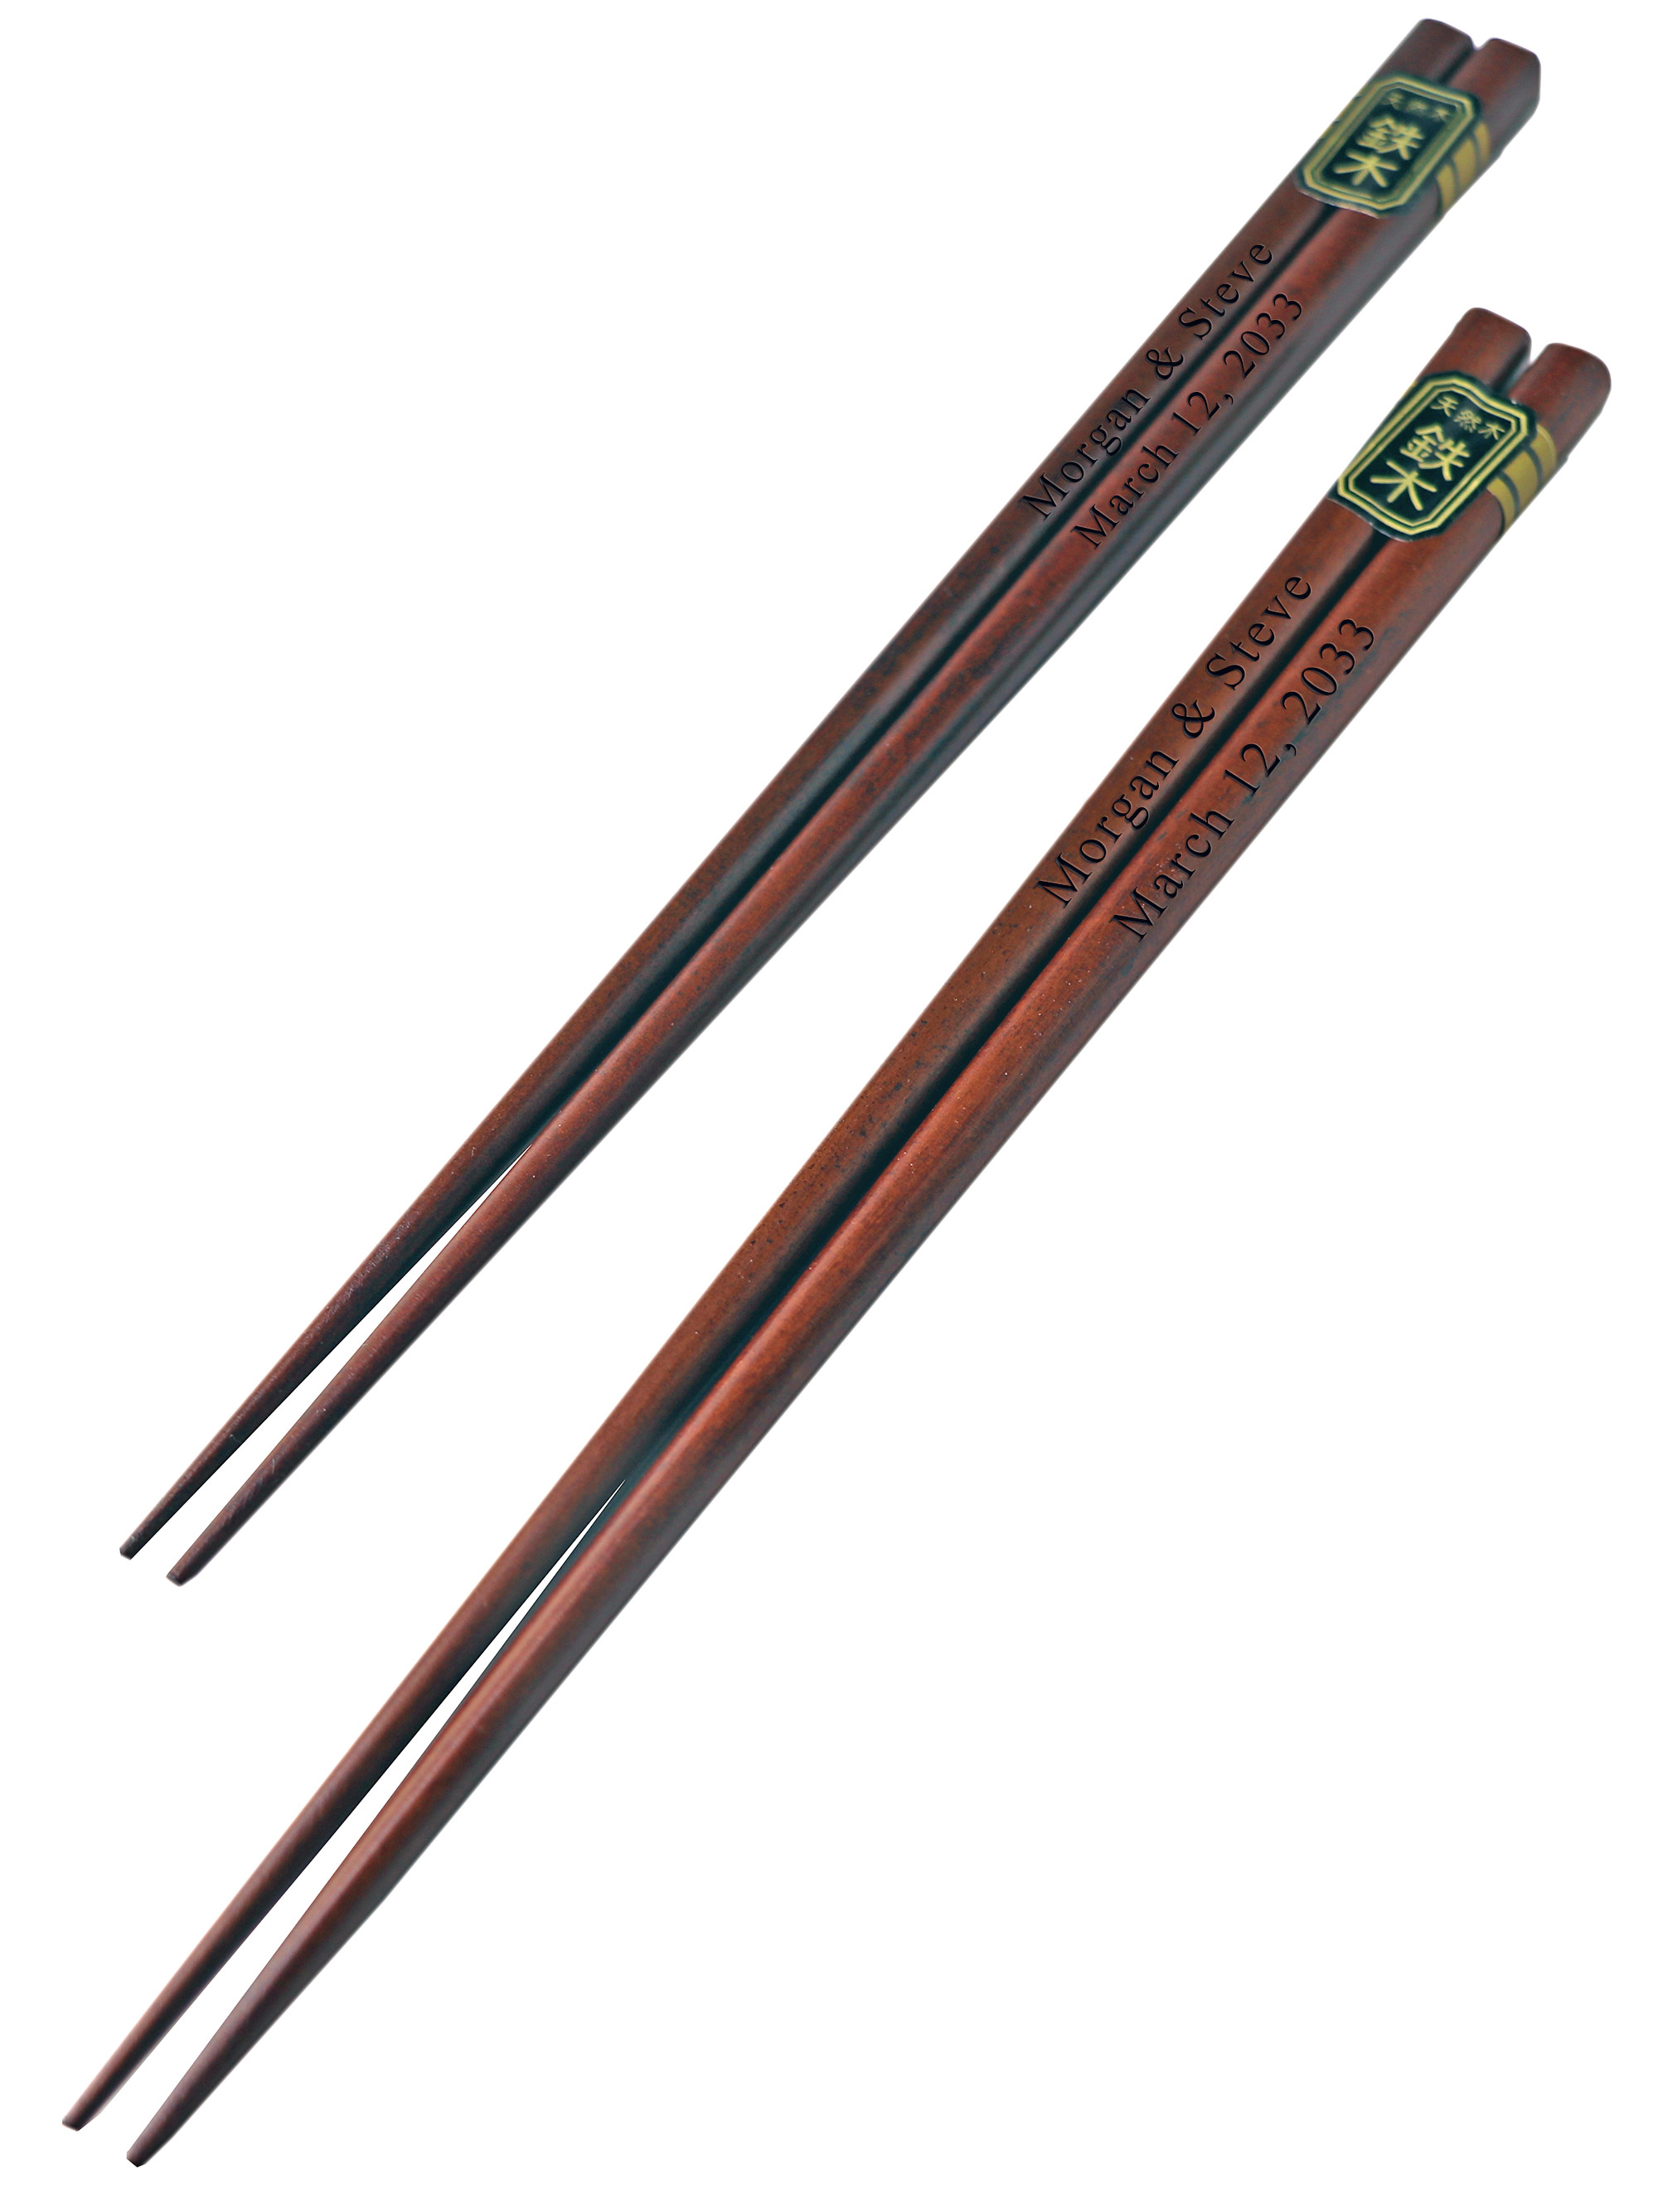 chopsticks with your name